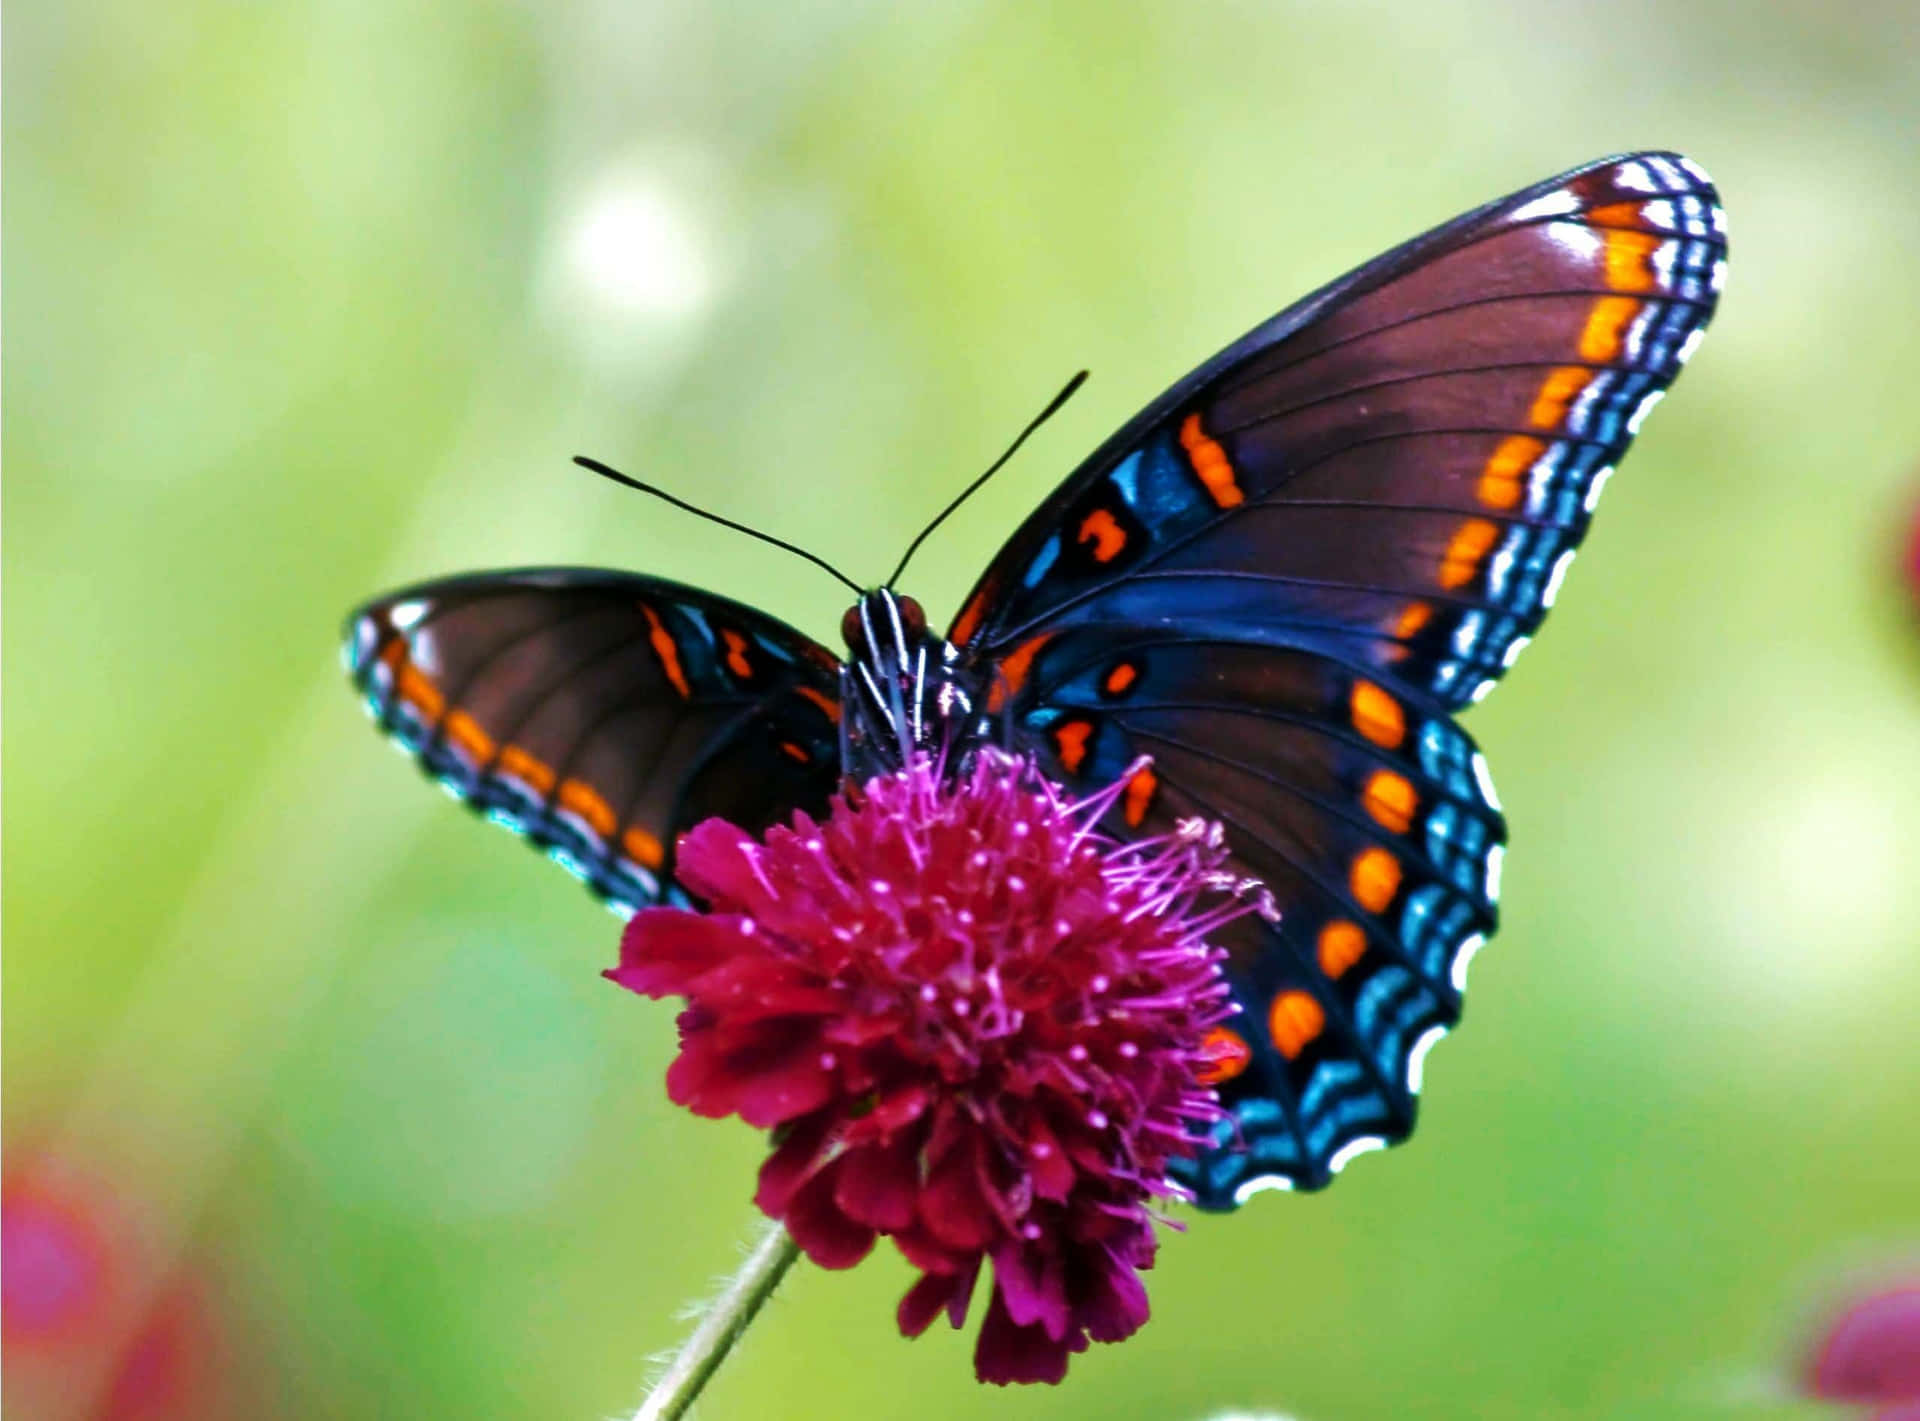 A vibrant and beautiful butterfly